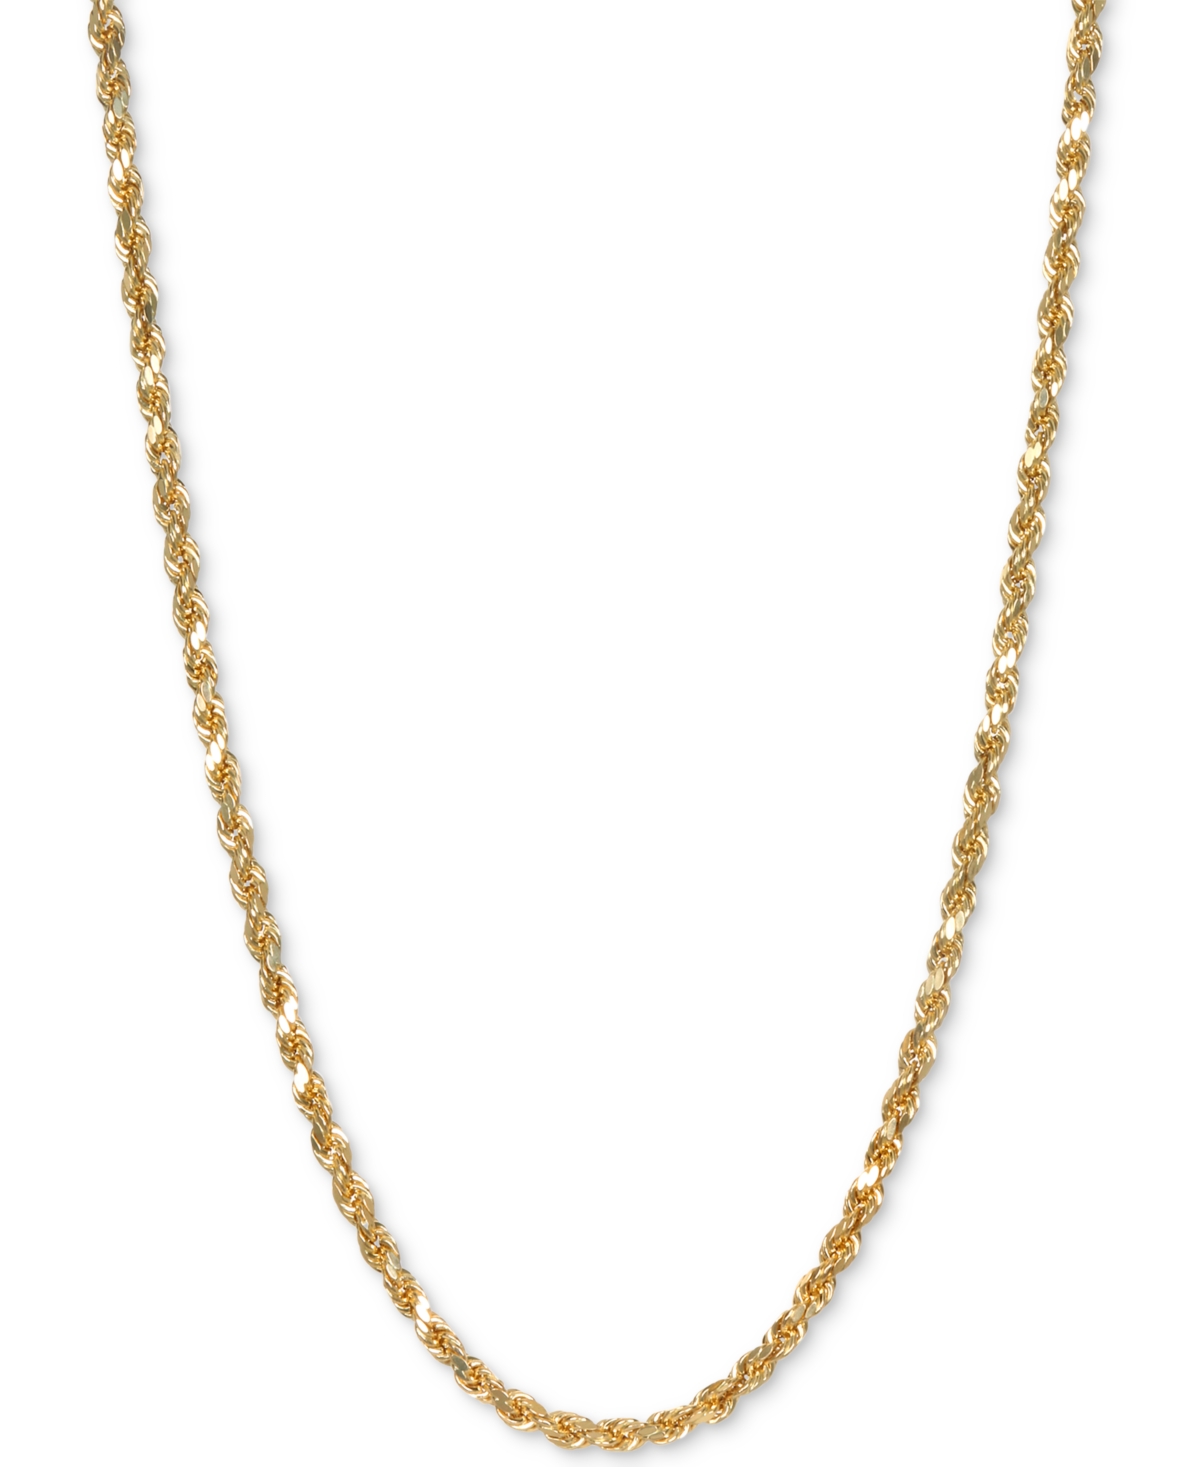 Rope 26" Chain Necklace in 14k Gold - Yellow Gold